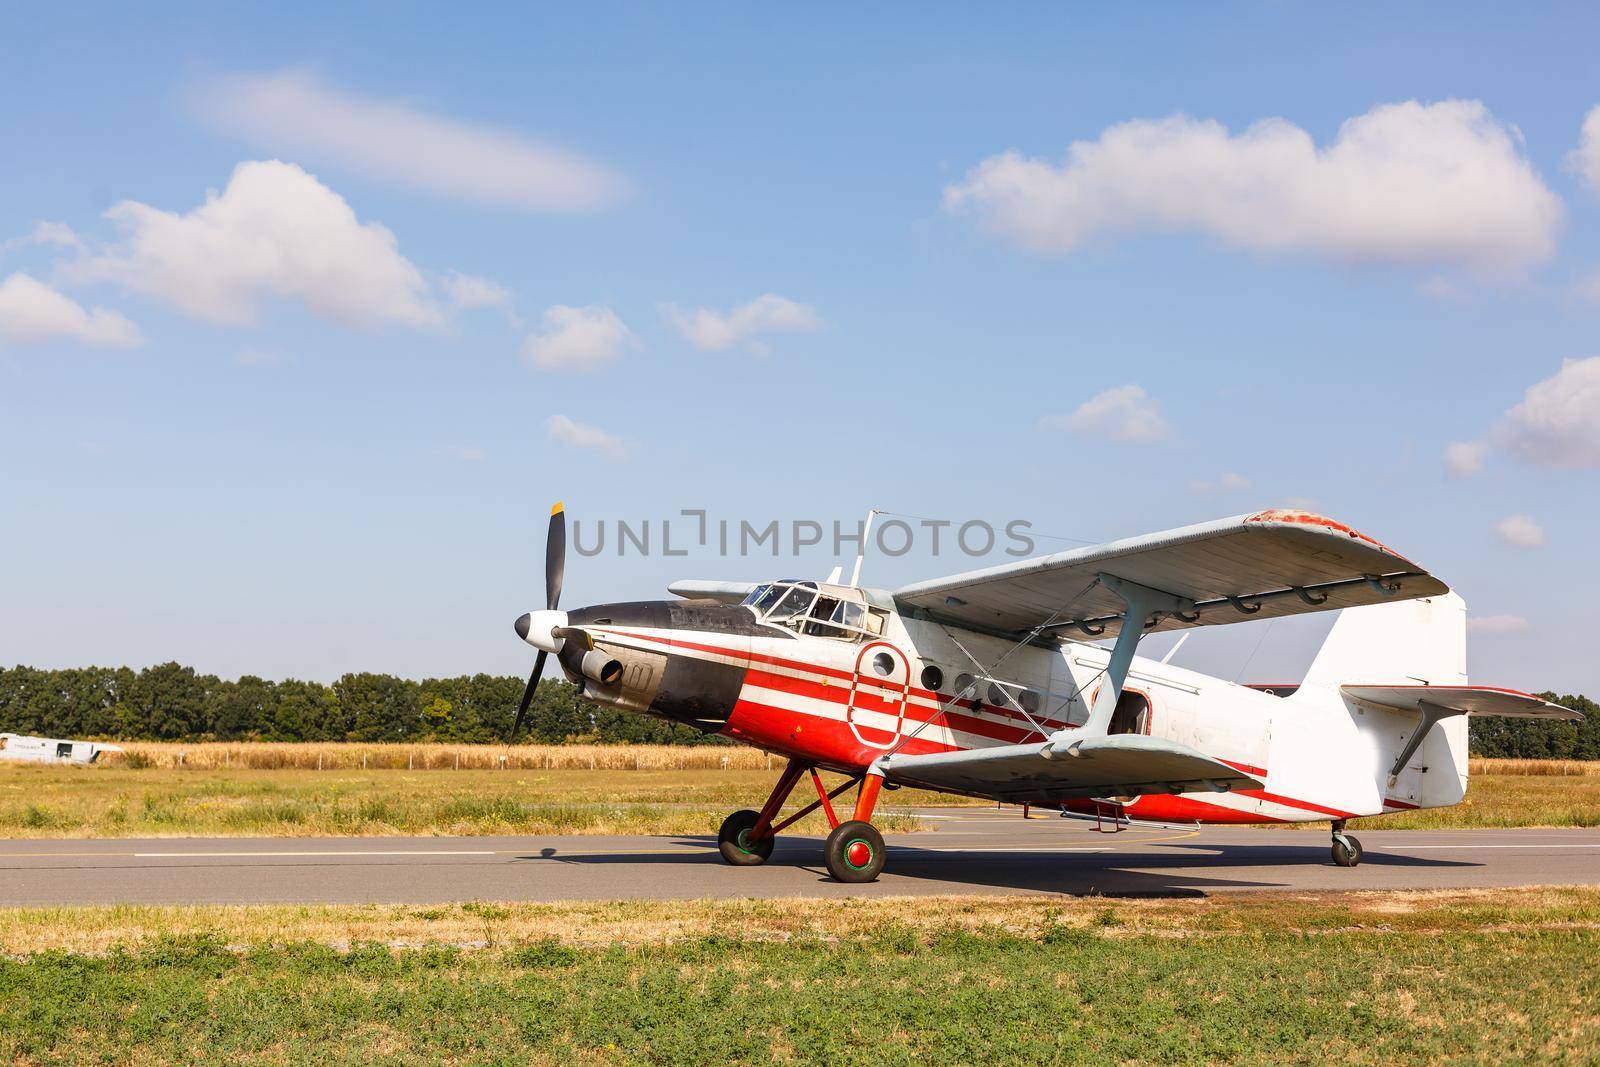 Small aircraft with propeller in parking lot